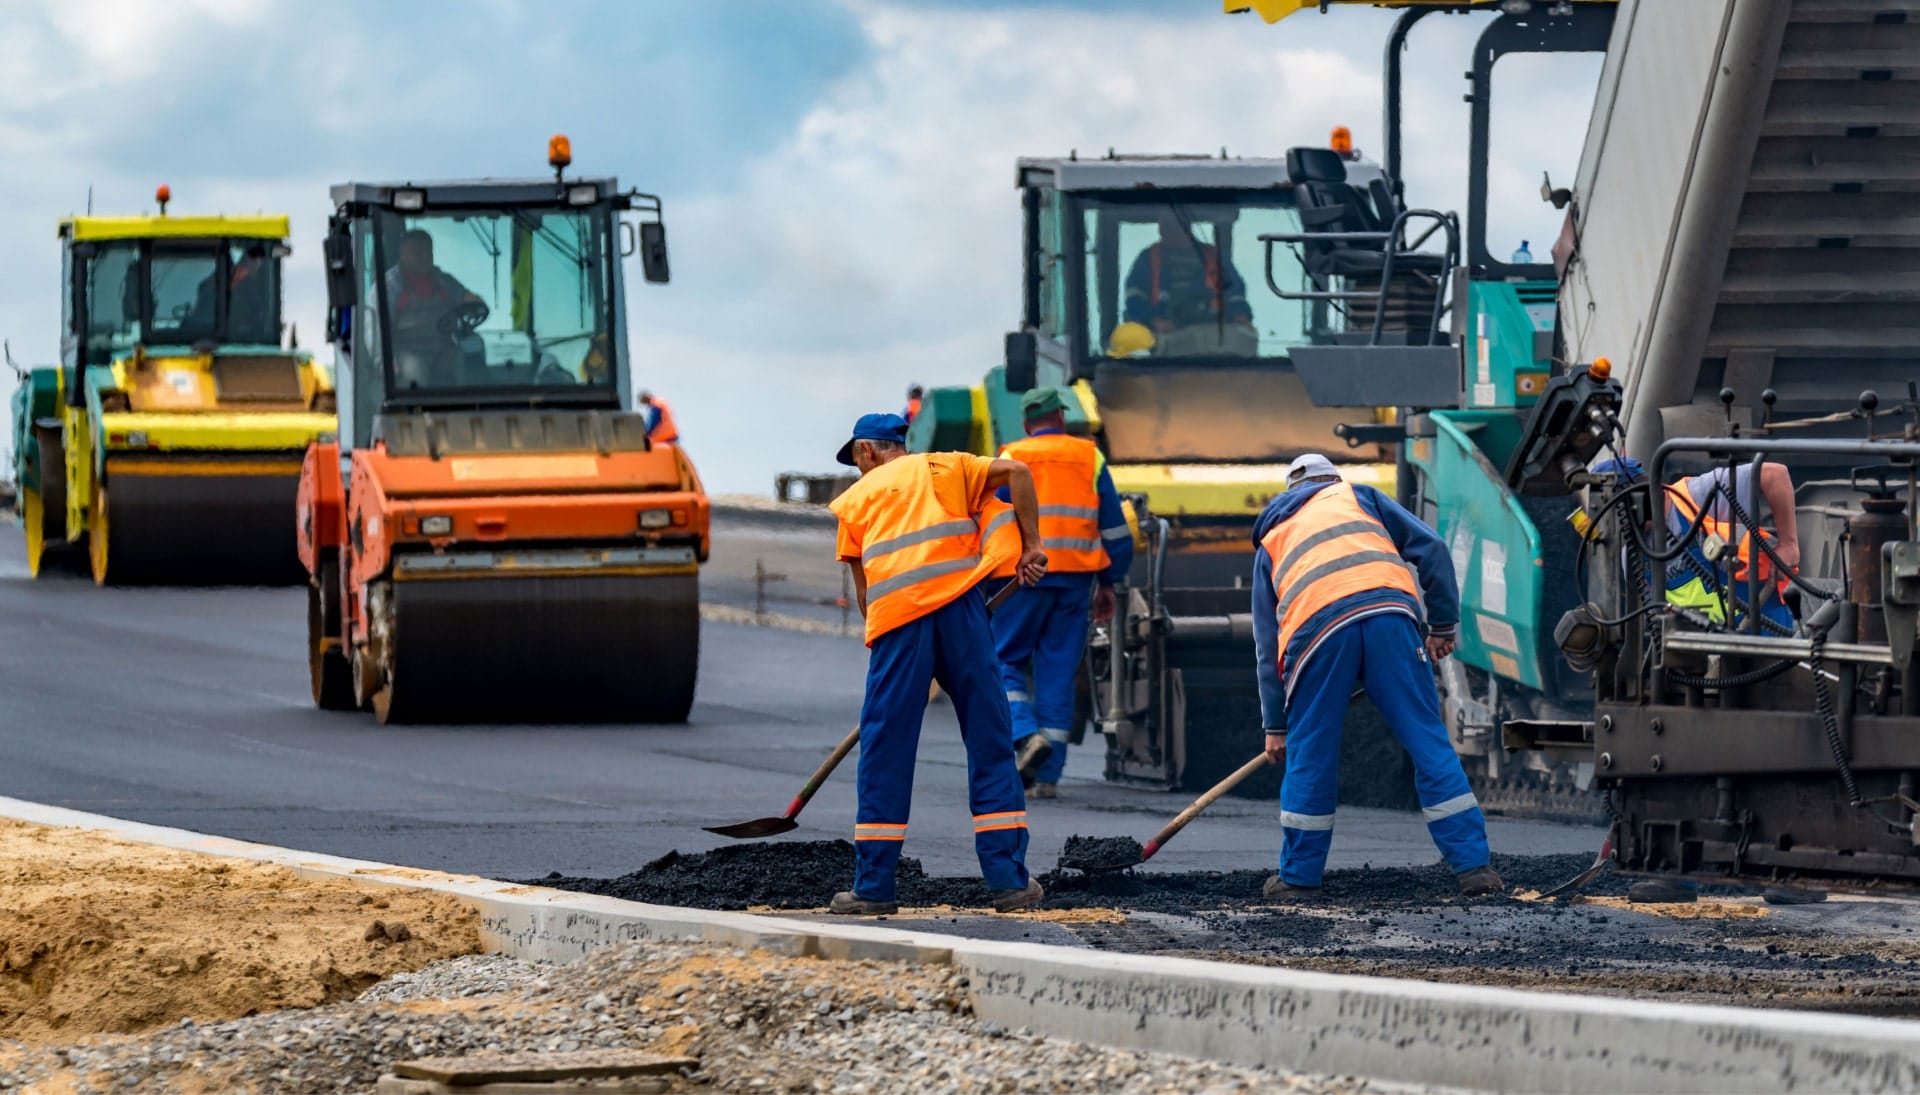 An airport runway resurfacing project in Fredericksburg, VA using high-quality asphalt for improved safety.